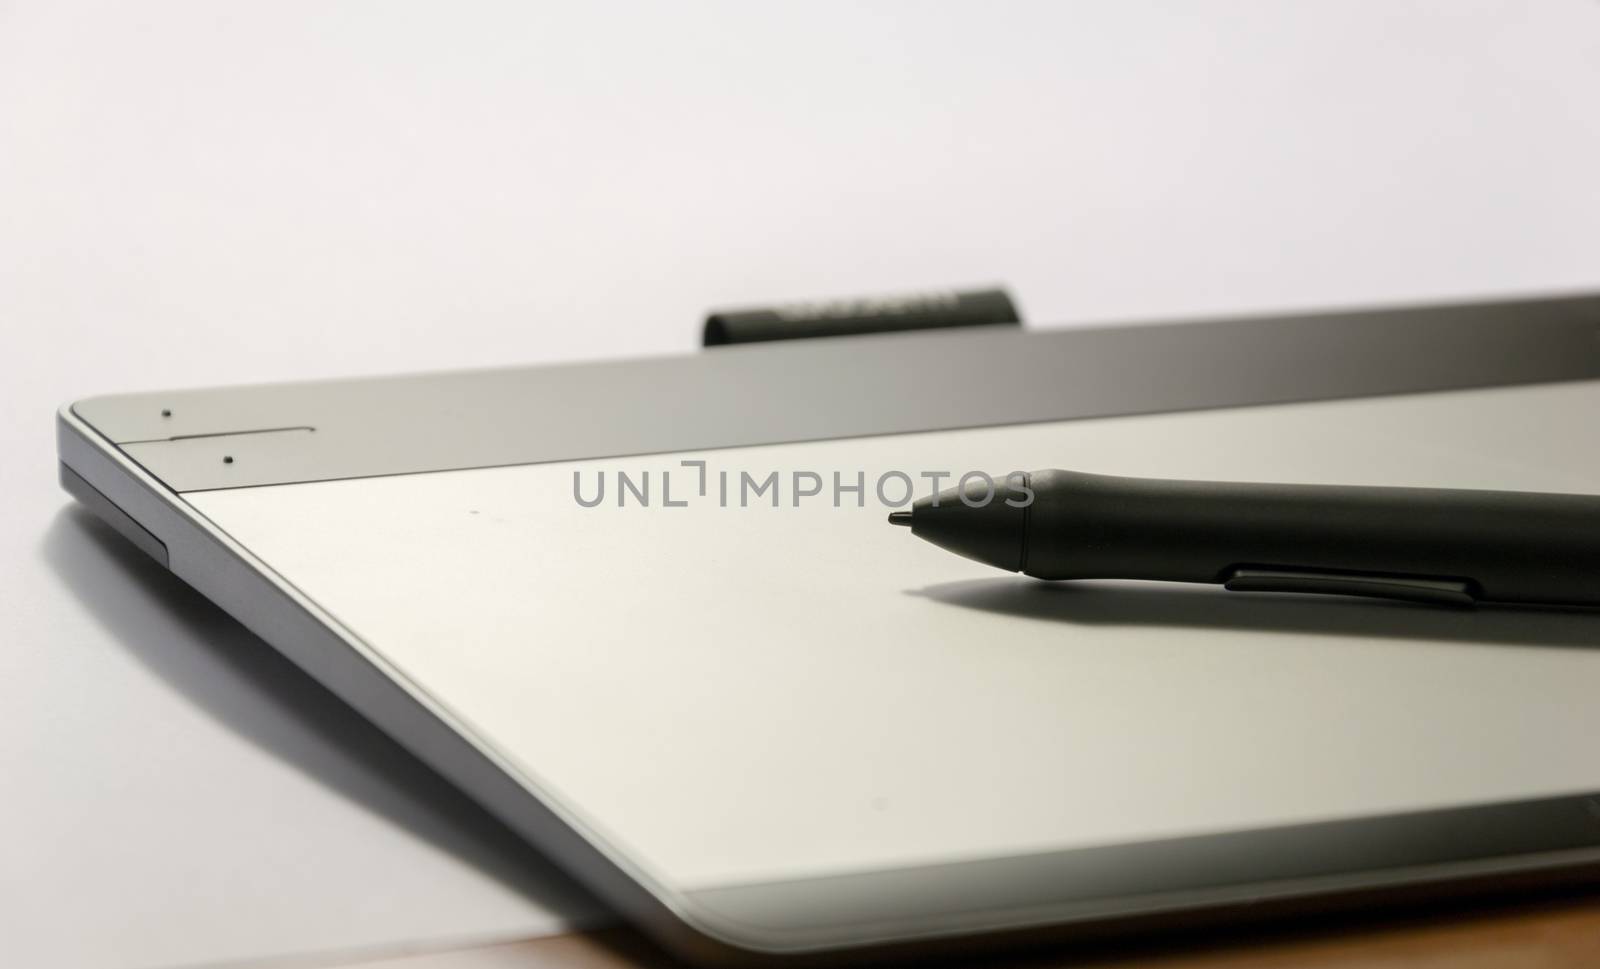 Close-up of a graphic tablet with his pen tool